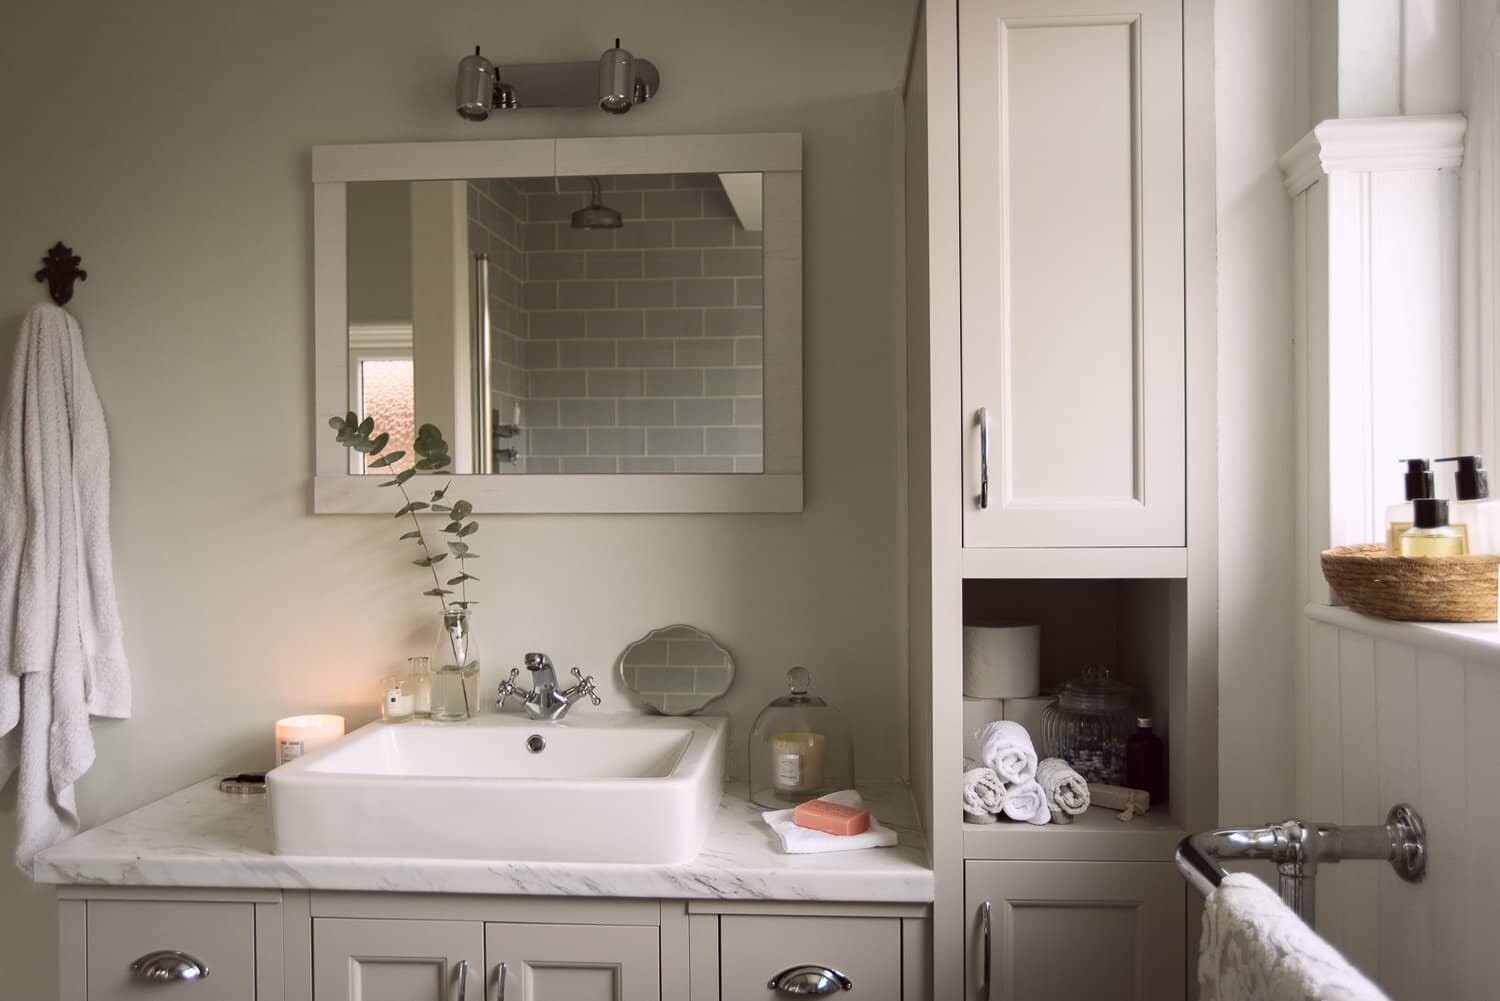 A Bathroom Renovation Cost, How Much Does A Small Bathroom Renovation Cost Uk